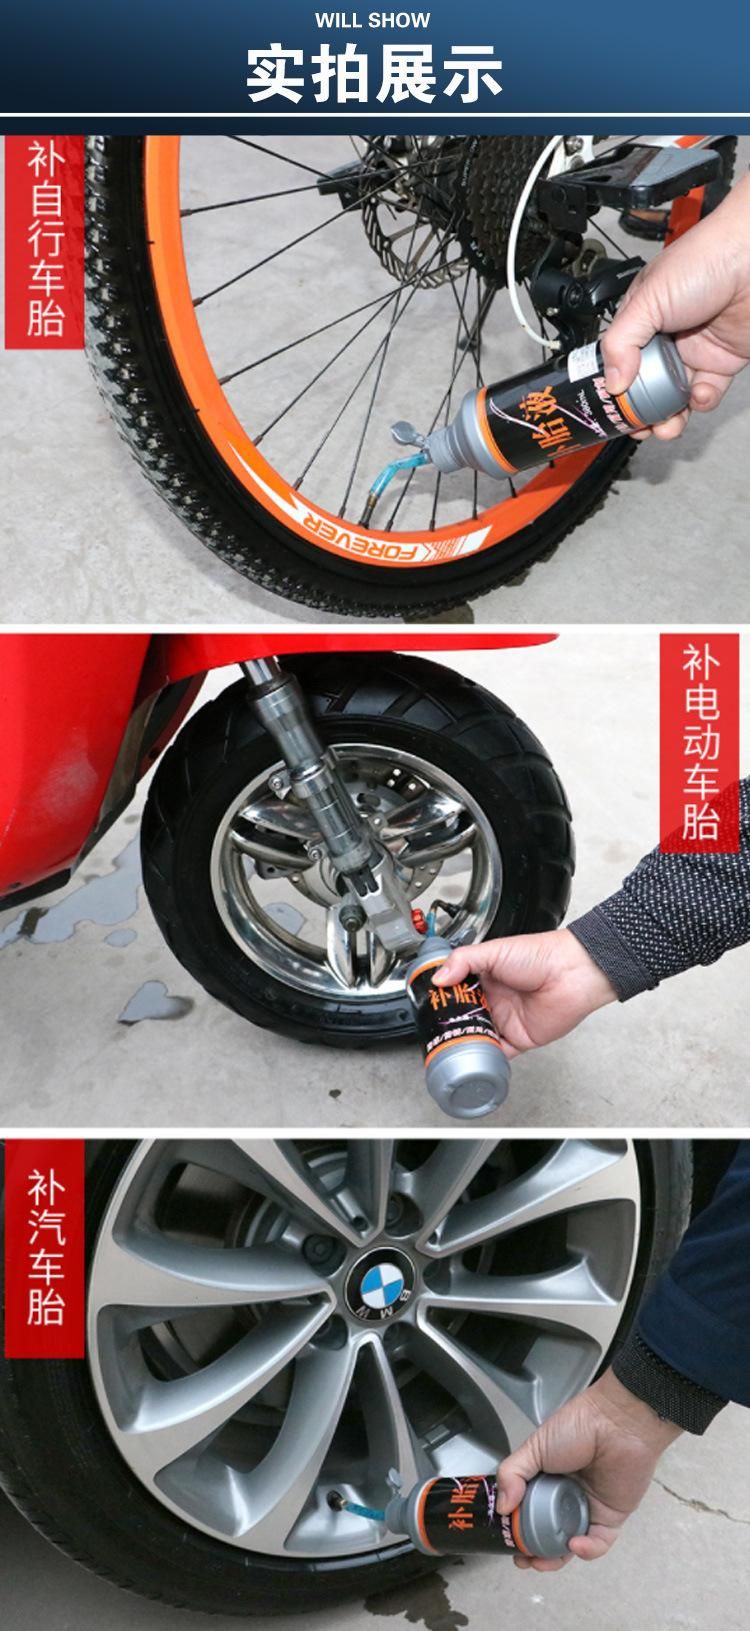 Tire Sealer and Inflator, Automotive Tire Care Products